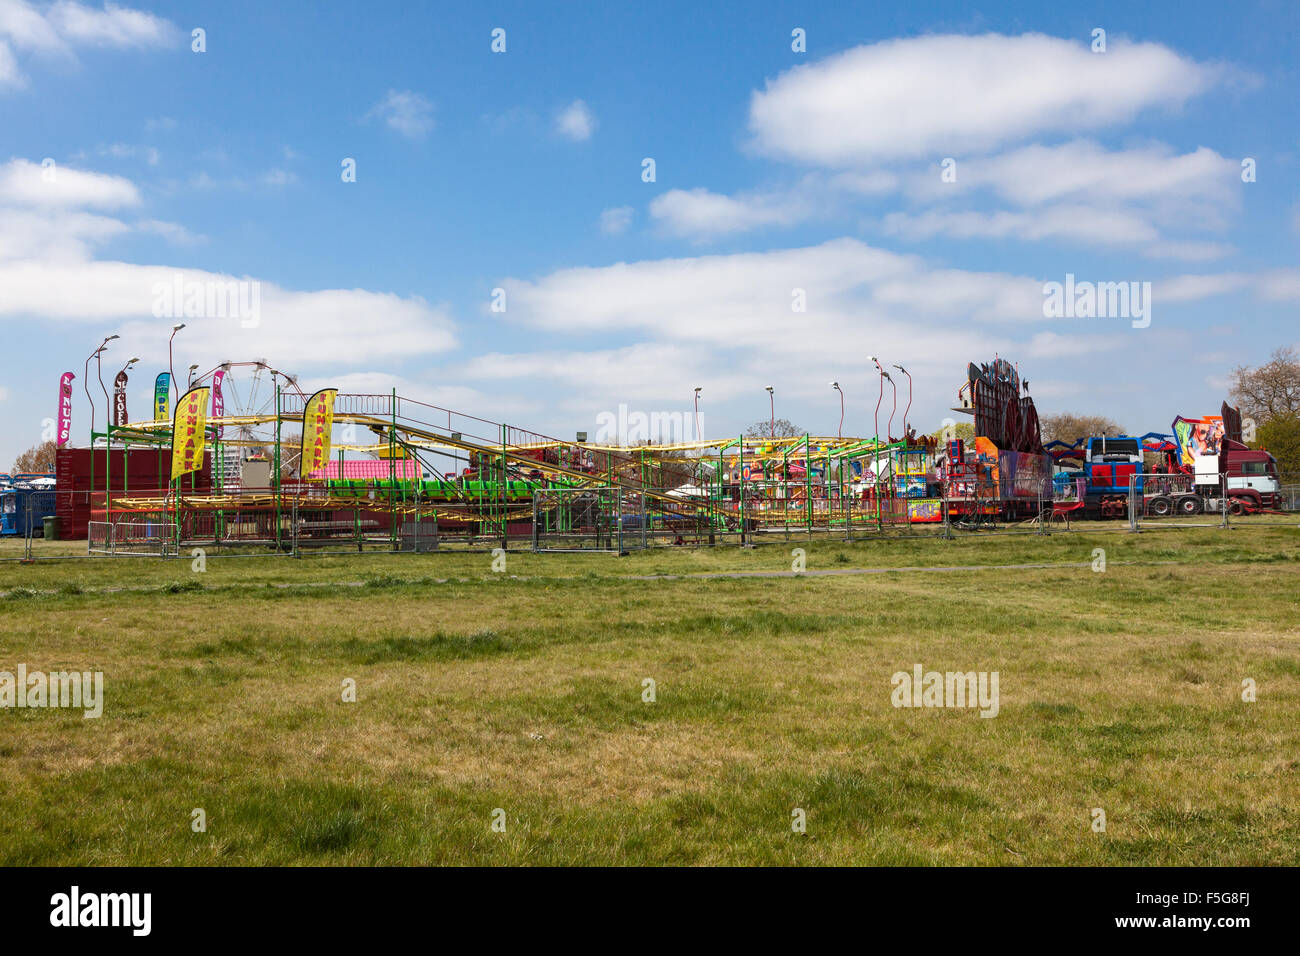 Travelling fairgroun on Woolwich Common, Woolwich, London, UK Stock Photo